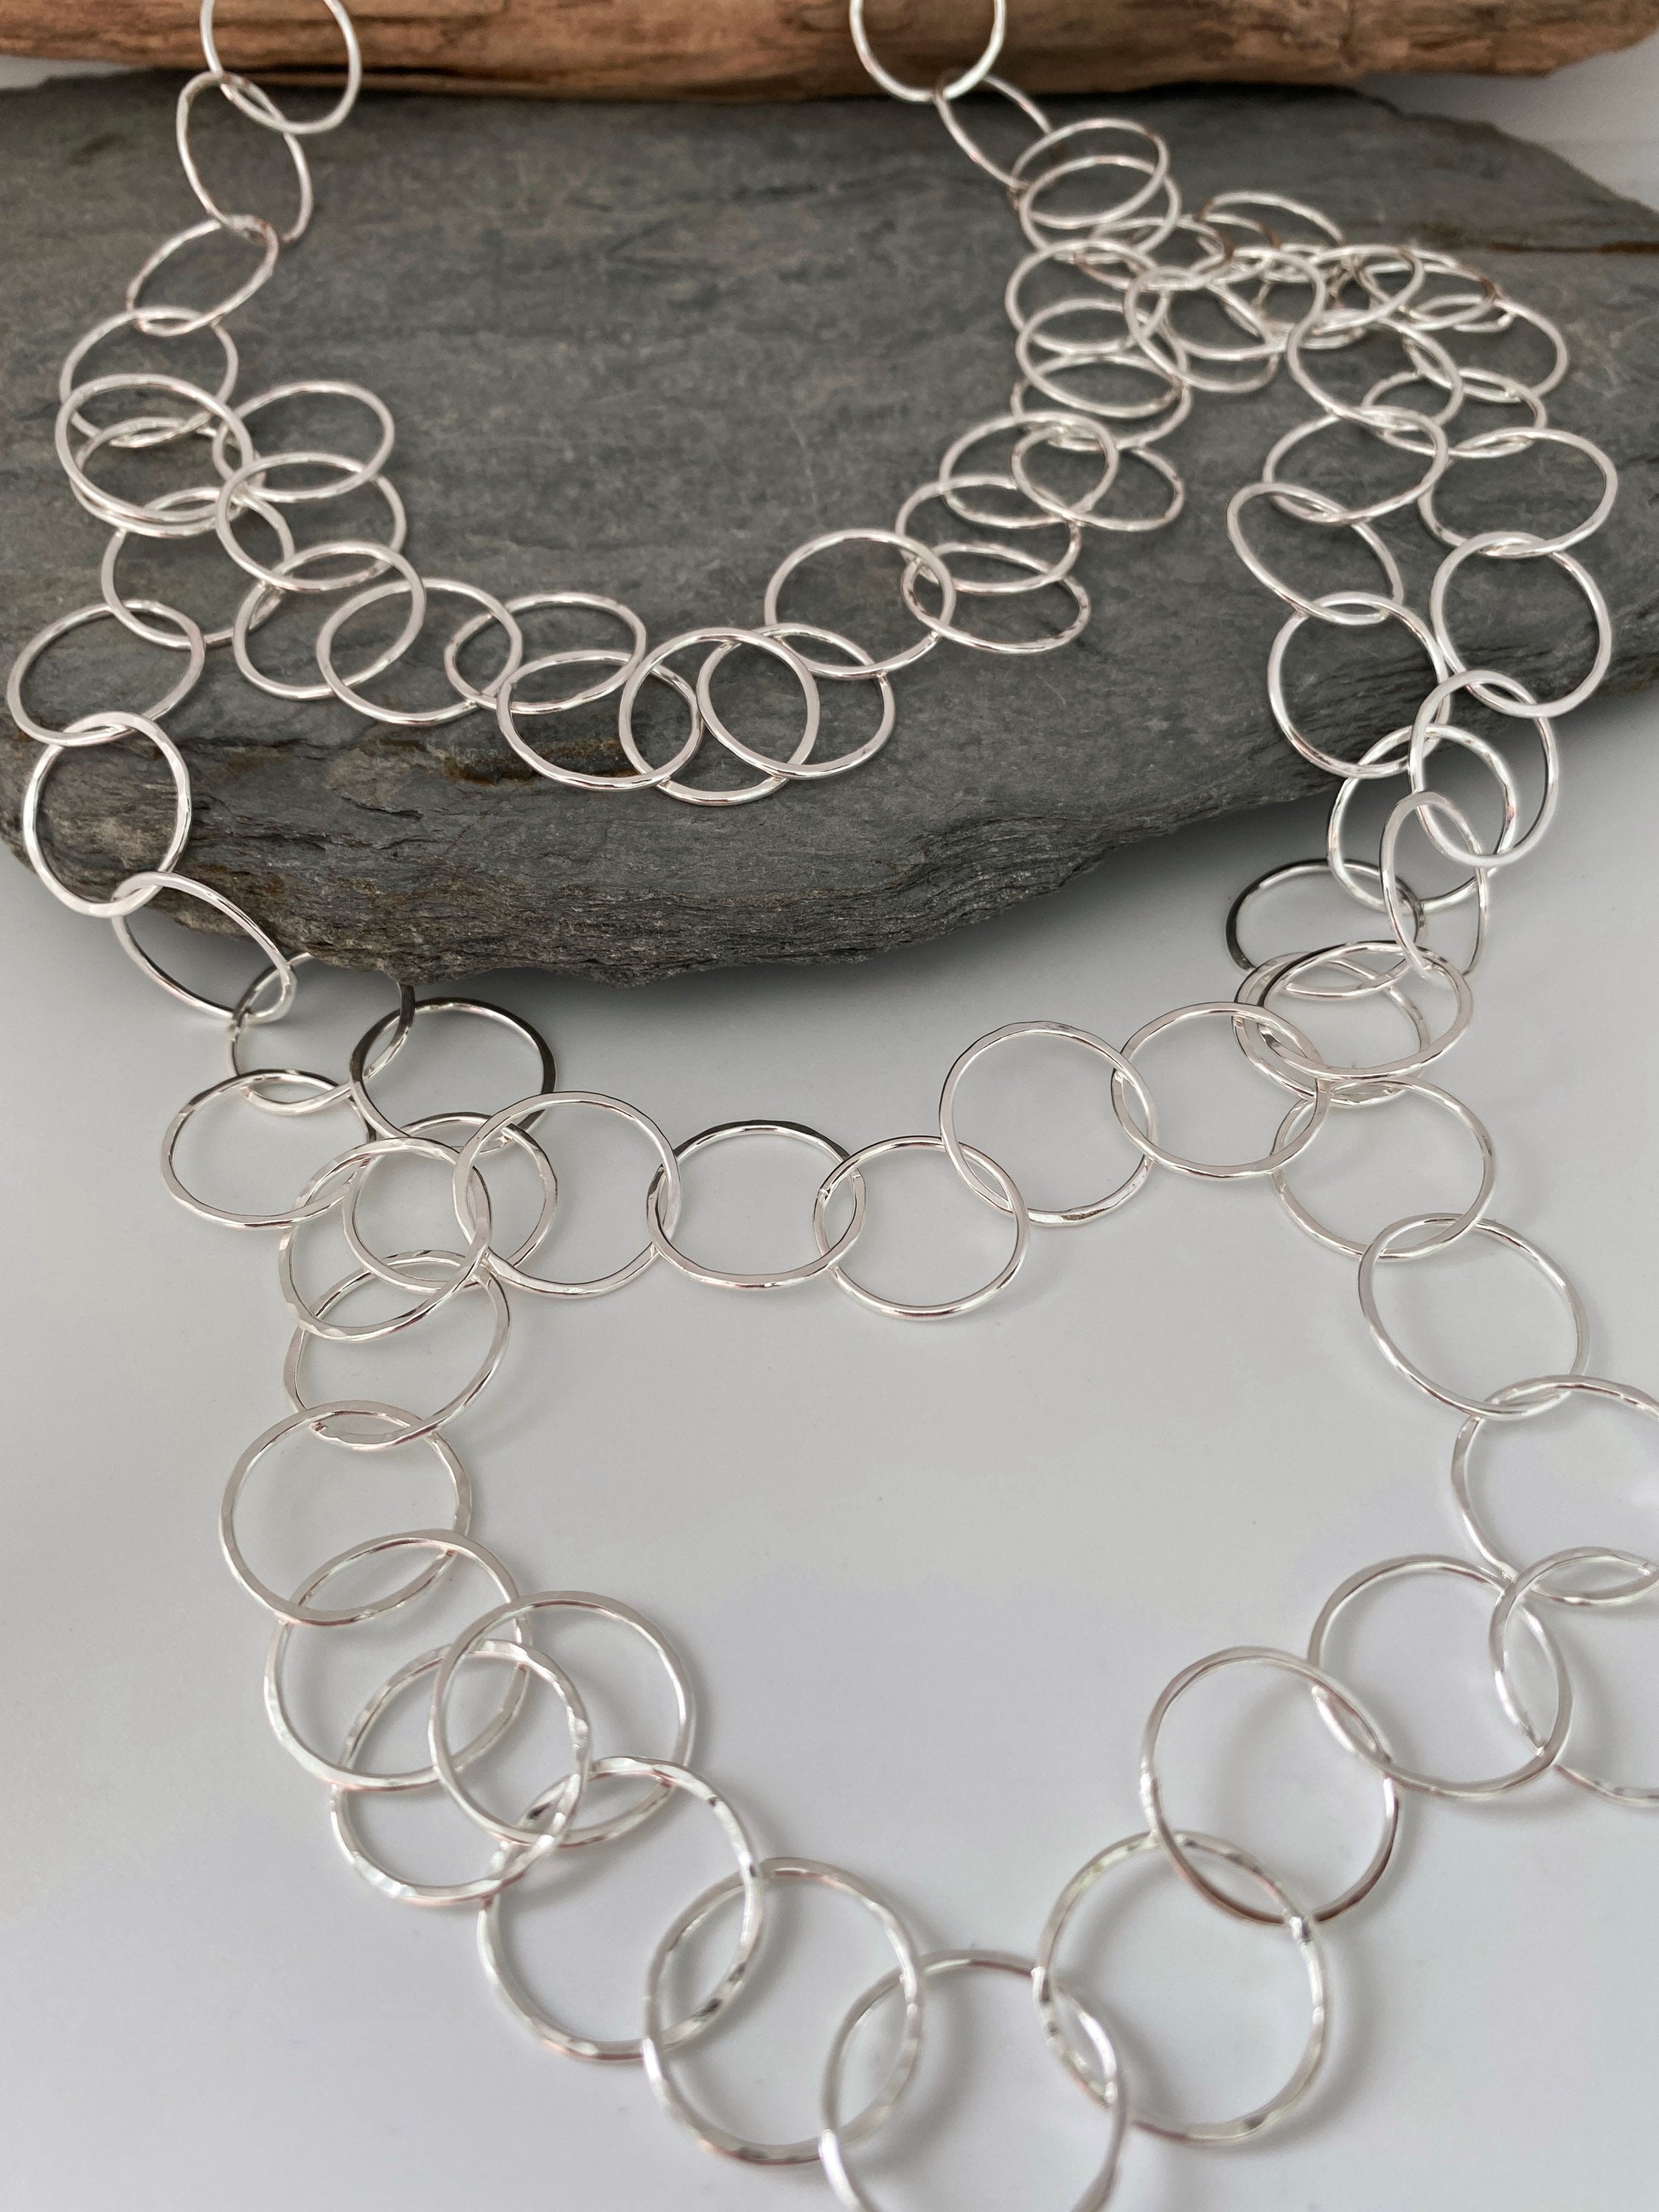 Long Handmade Sterling Silver Chain Necklace With Three Layers, Made From Large Round Open Hammered Links